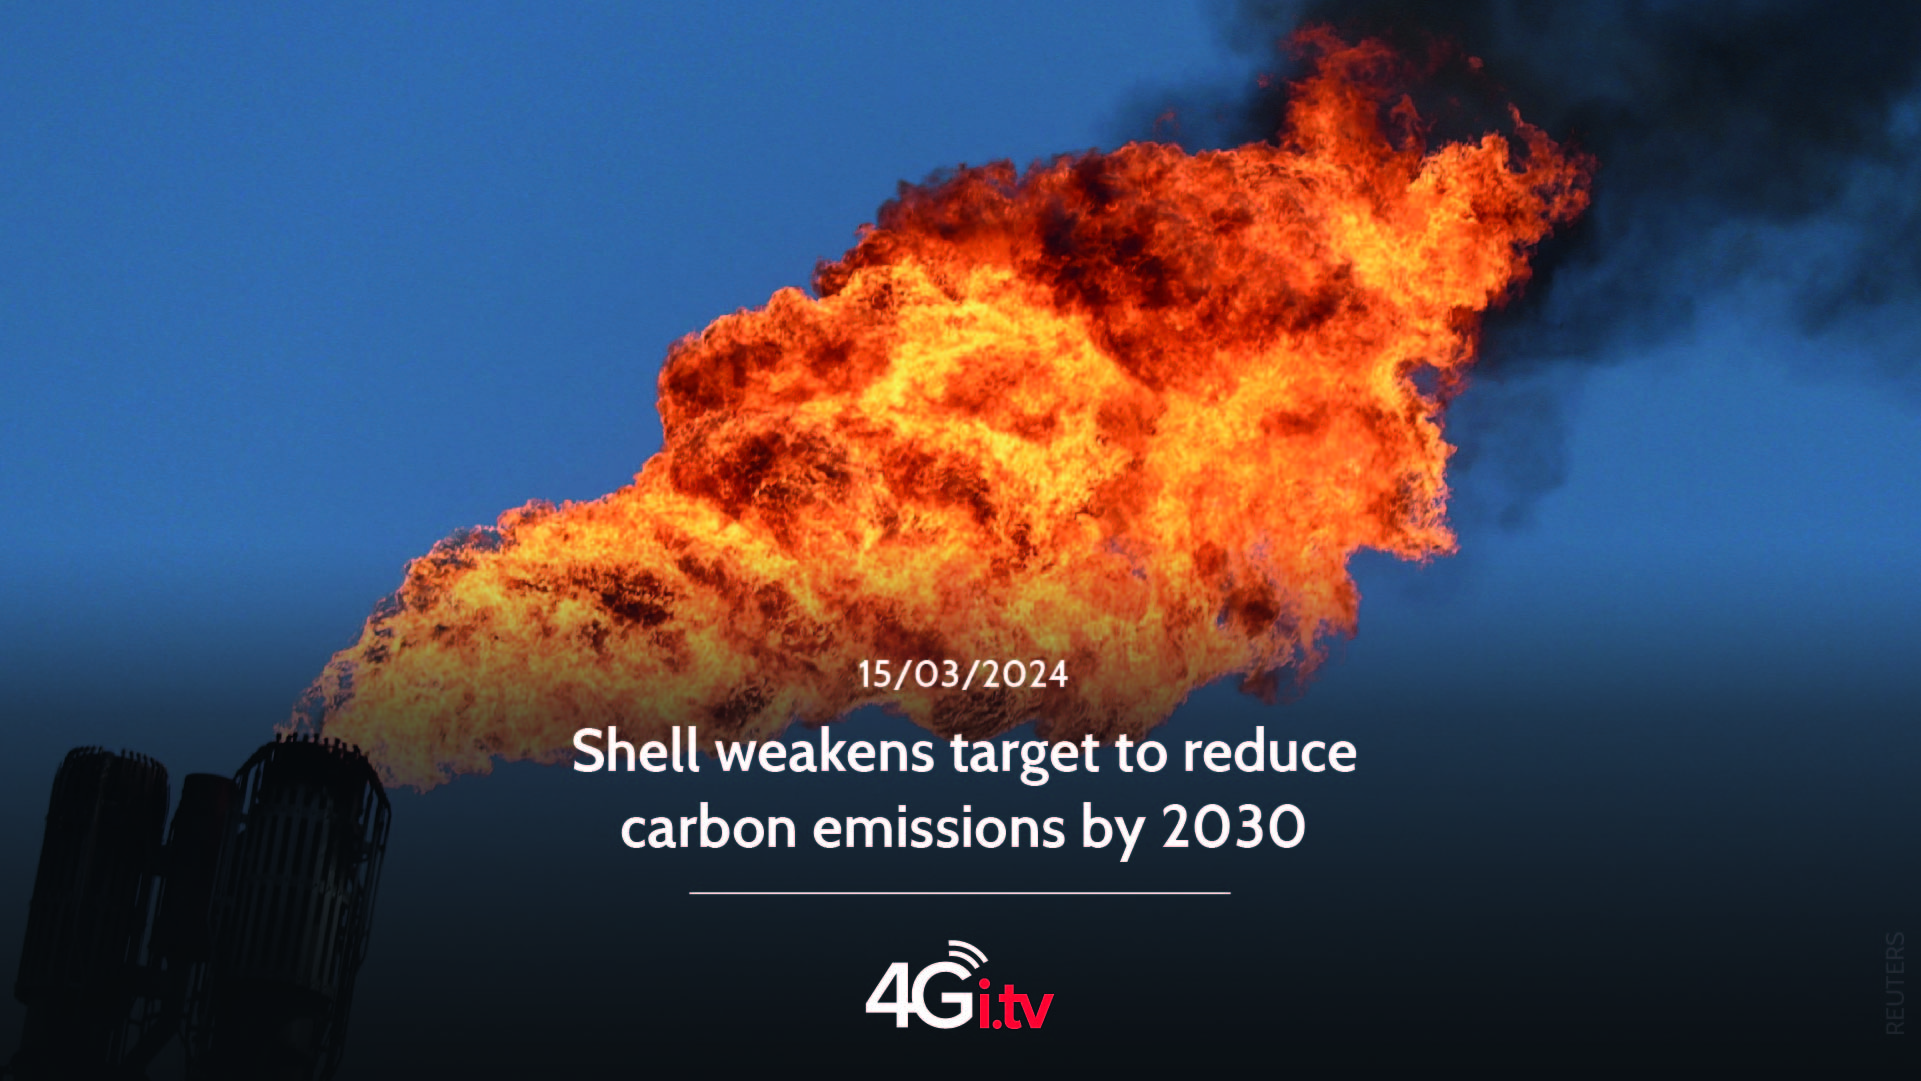 Подробнее о статье Shell weakens target to reduce carbon emissions by 2030